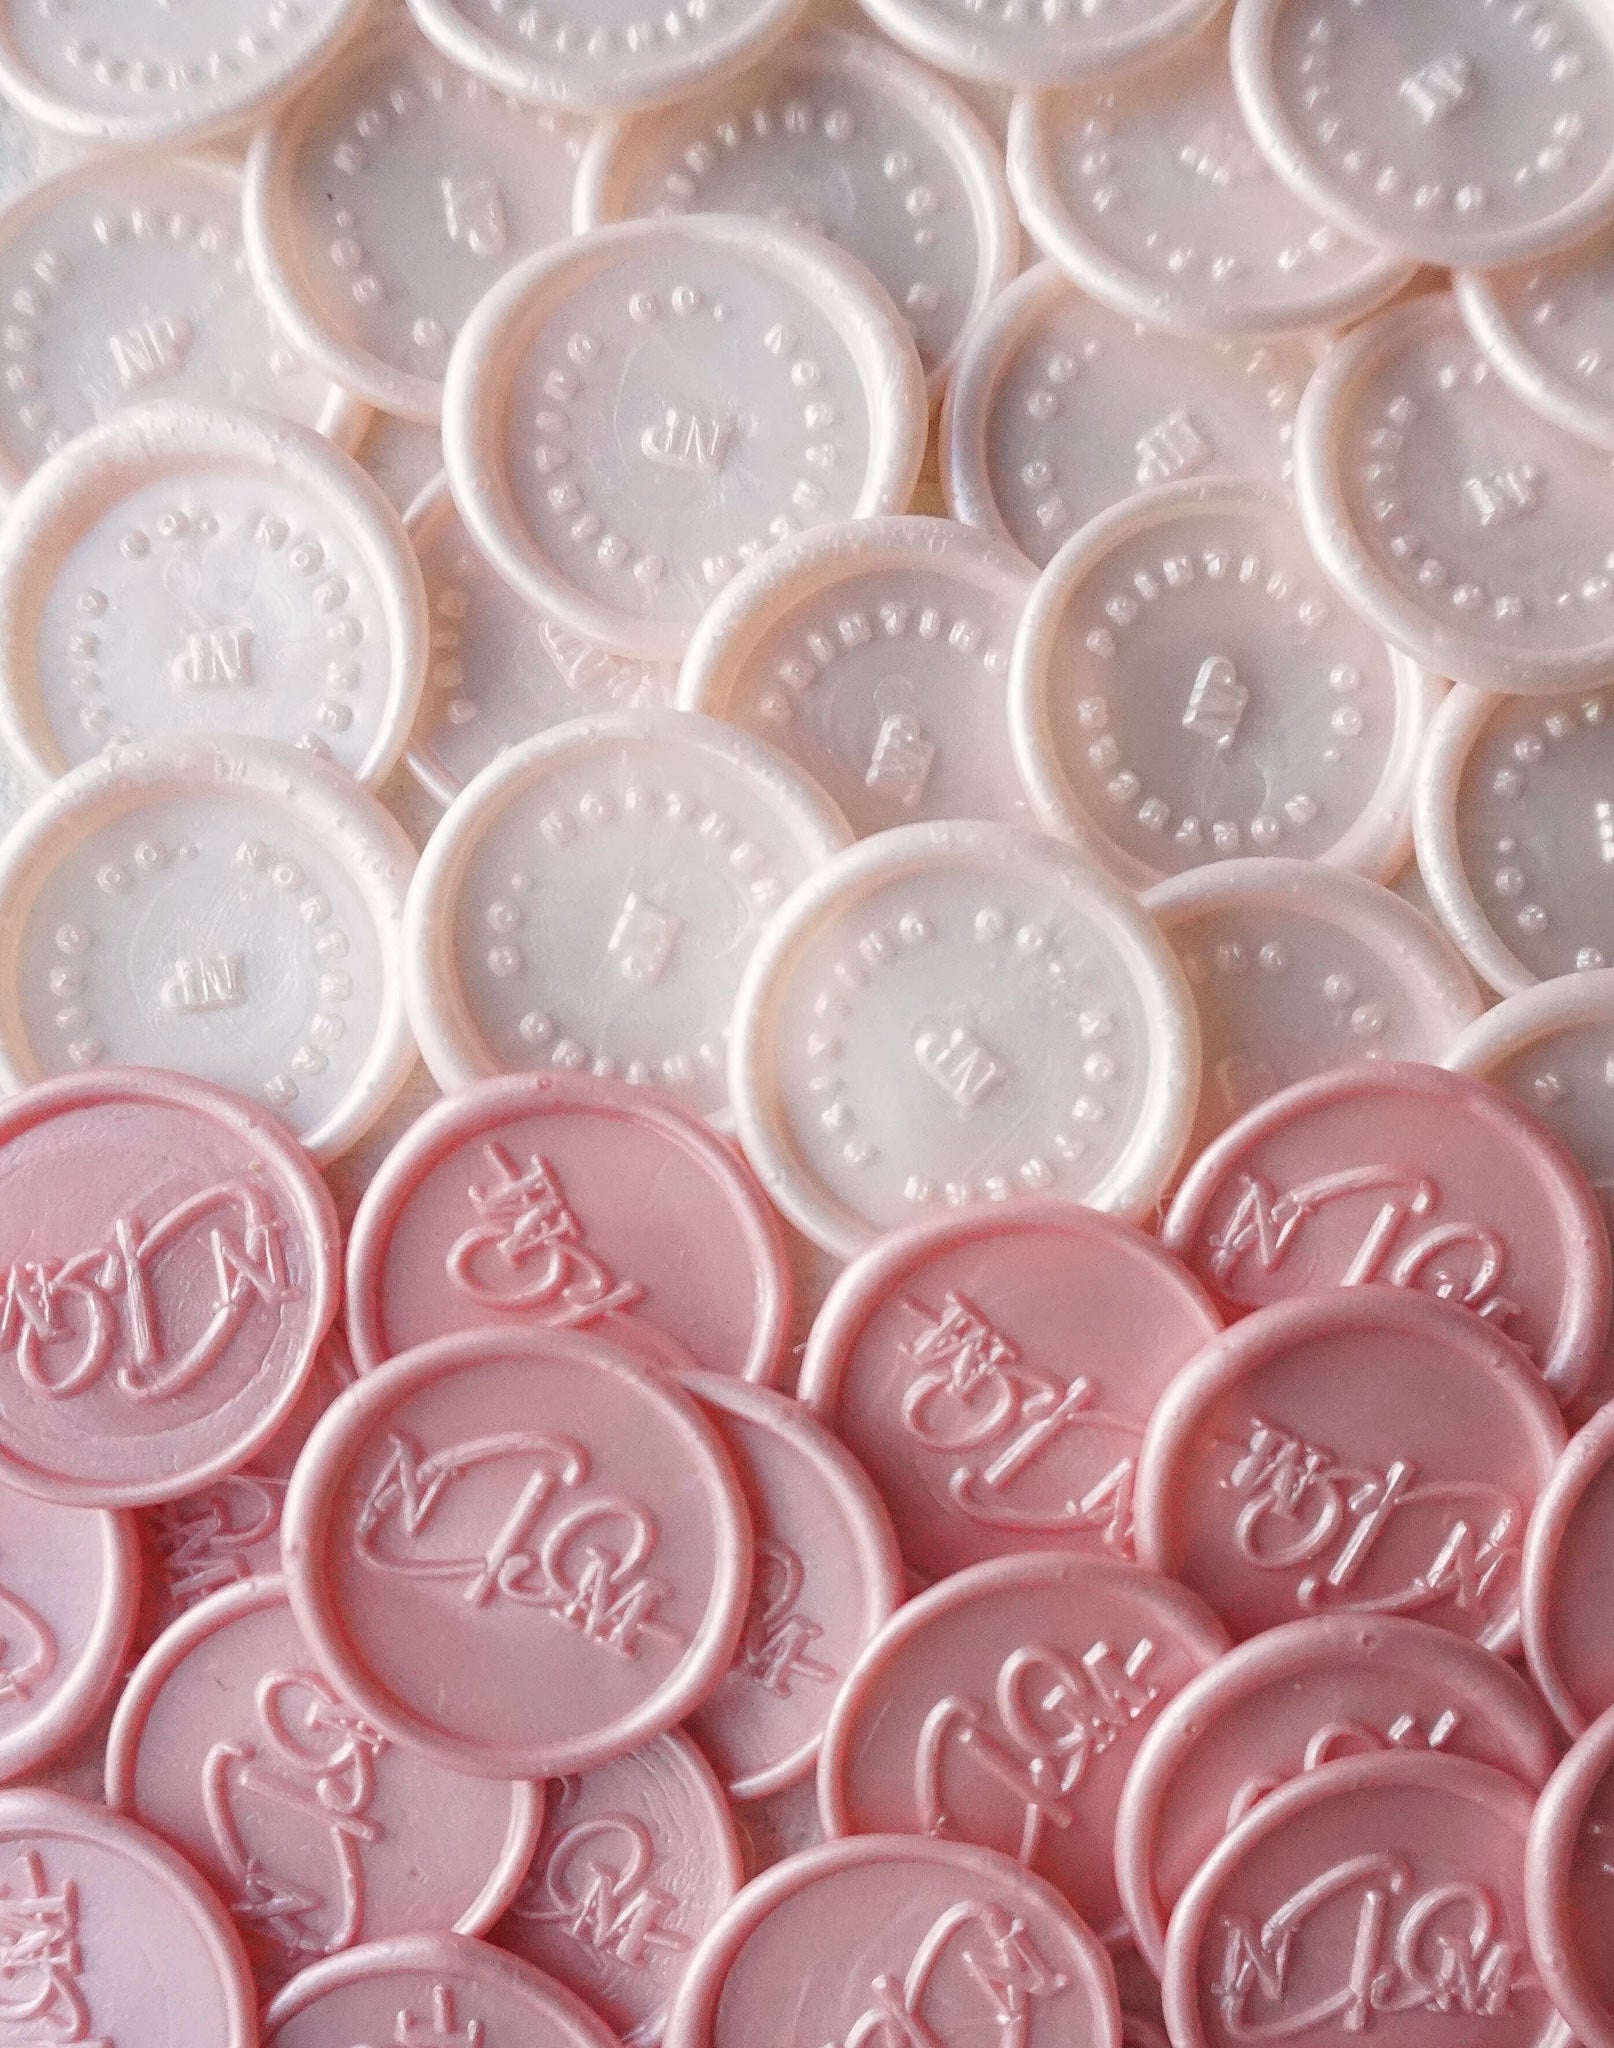 shades of pink wax seal stamps 